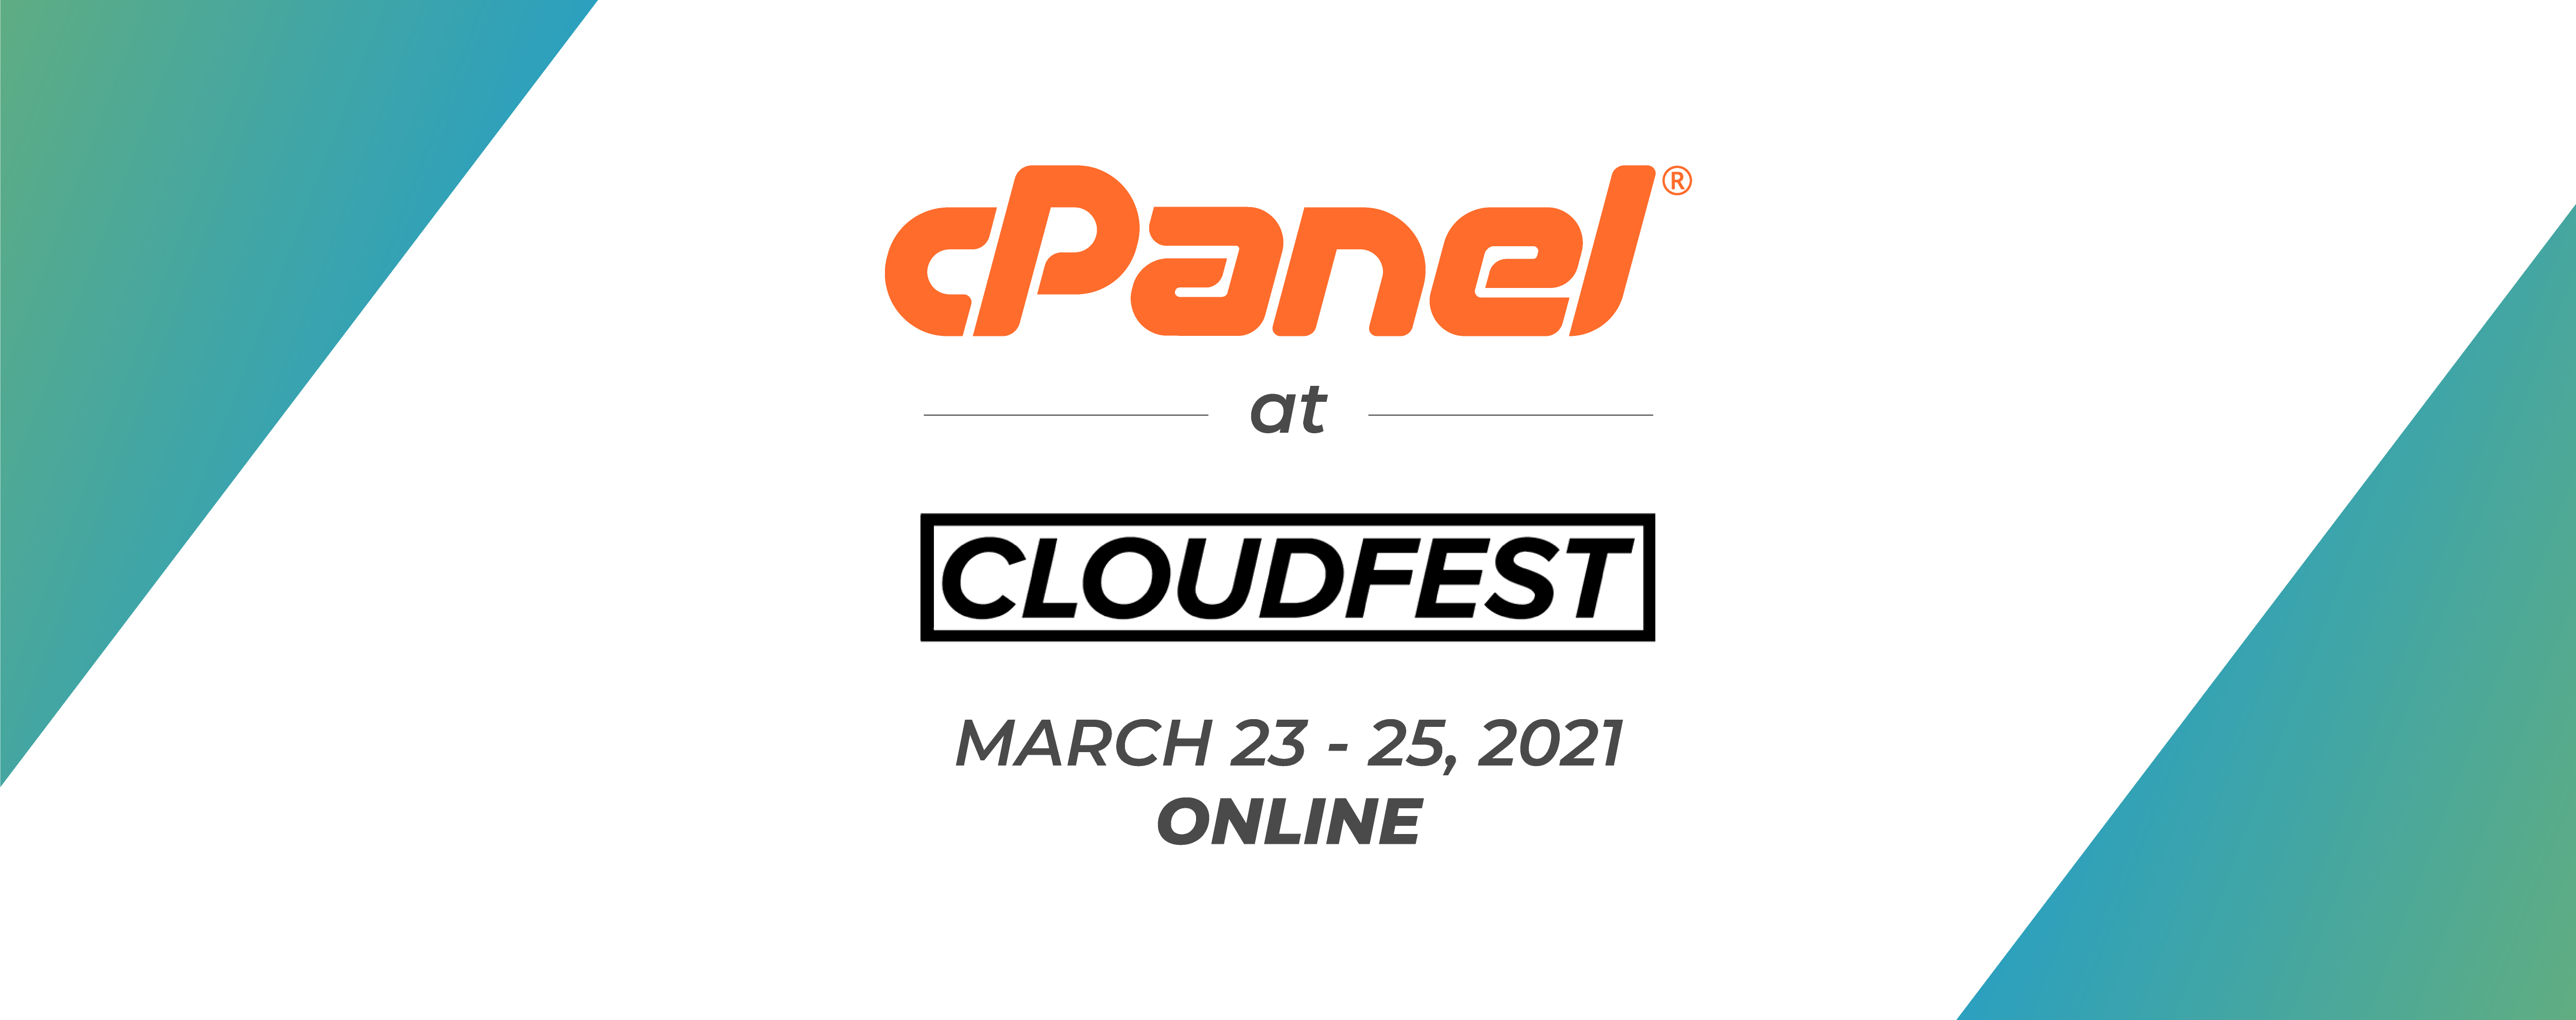 Join cPanel at CloudFest 2021 Online